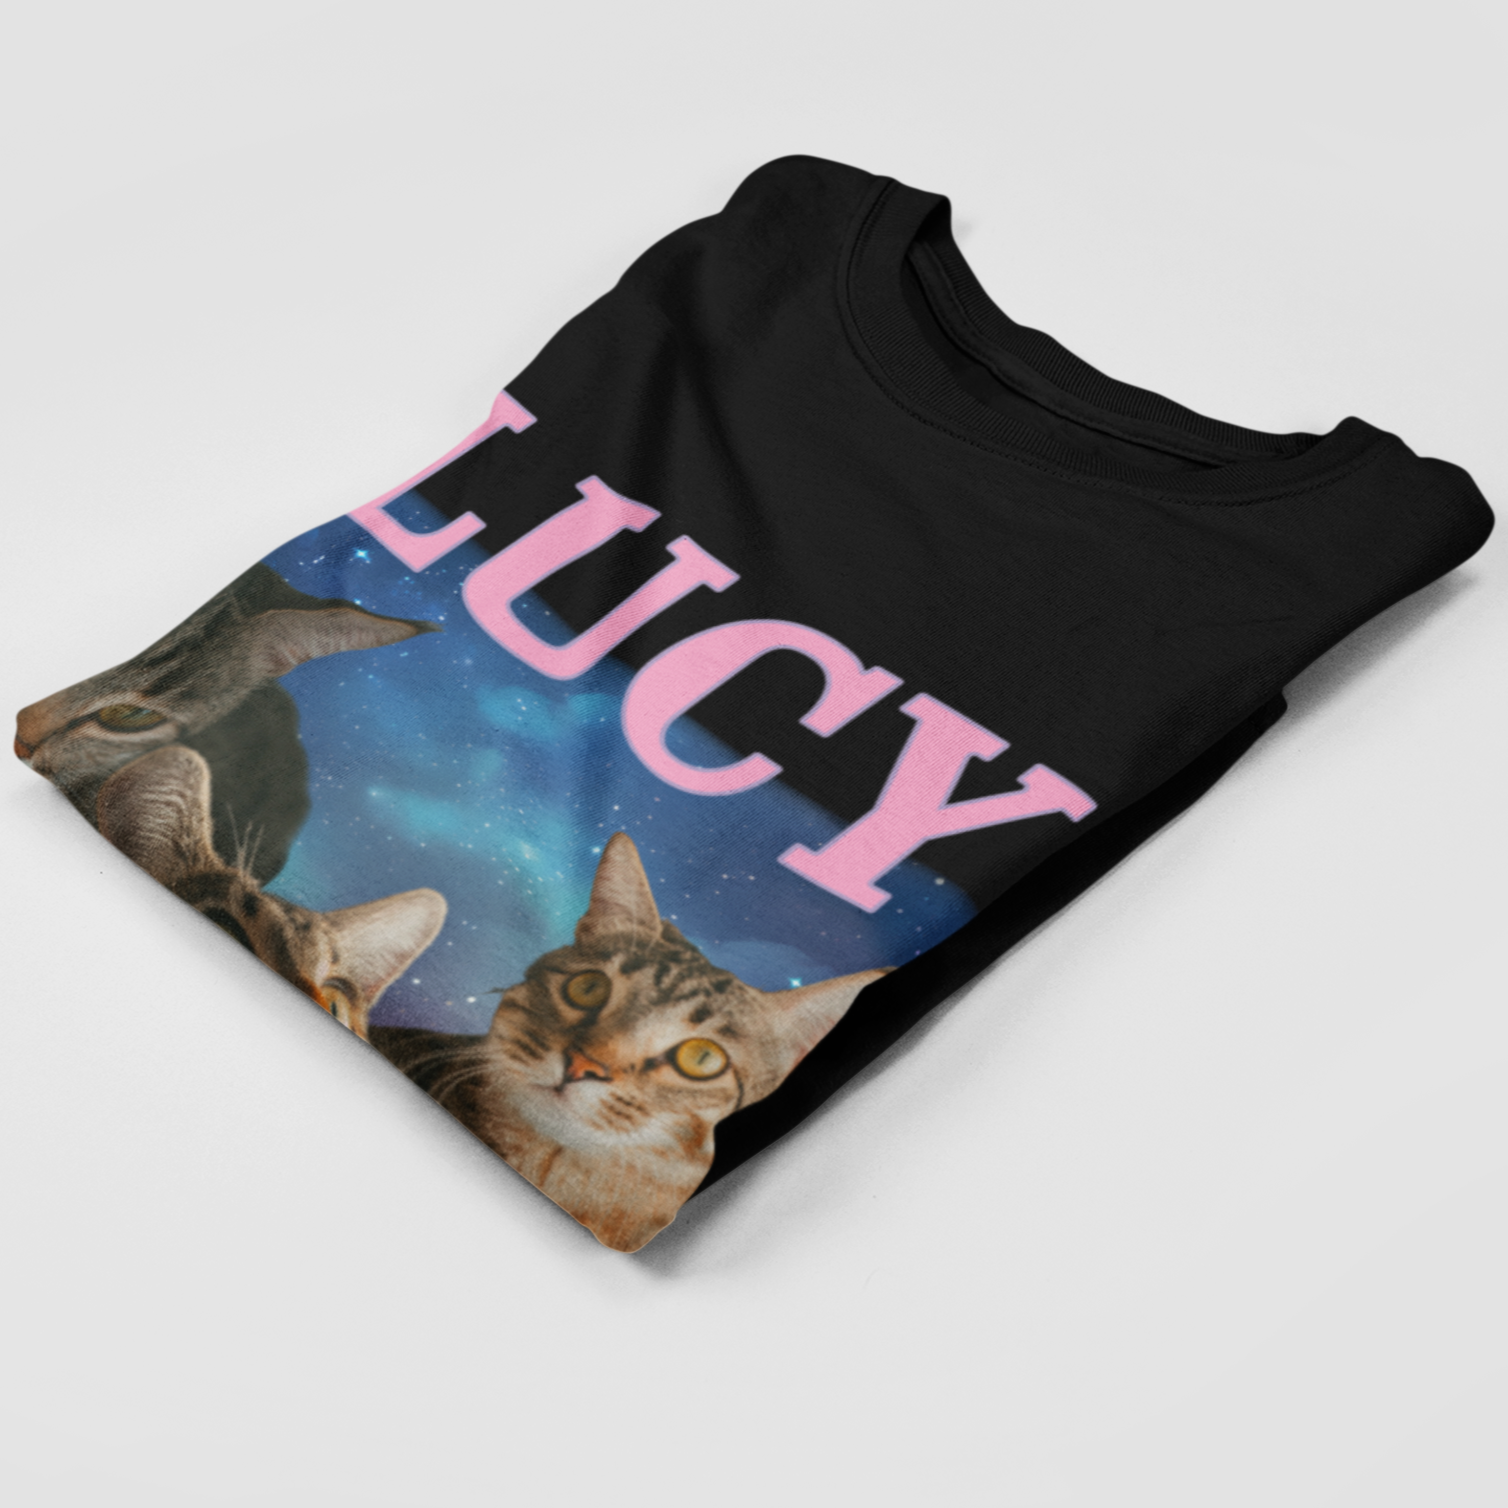 Folded t-shirt revealing six custom cat images, each with its corresponding name labeled above.